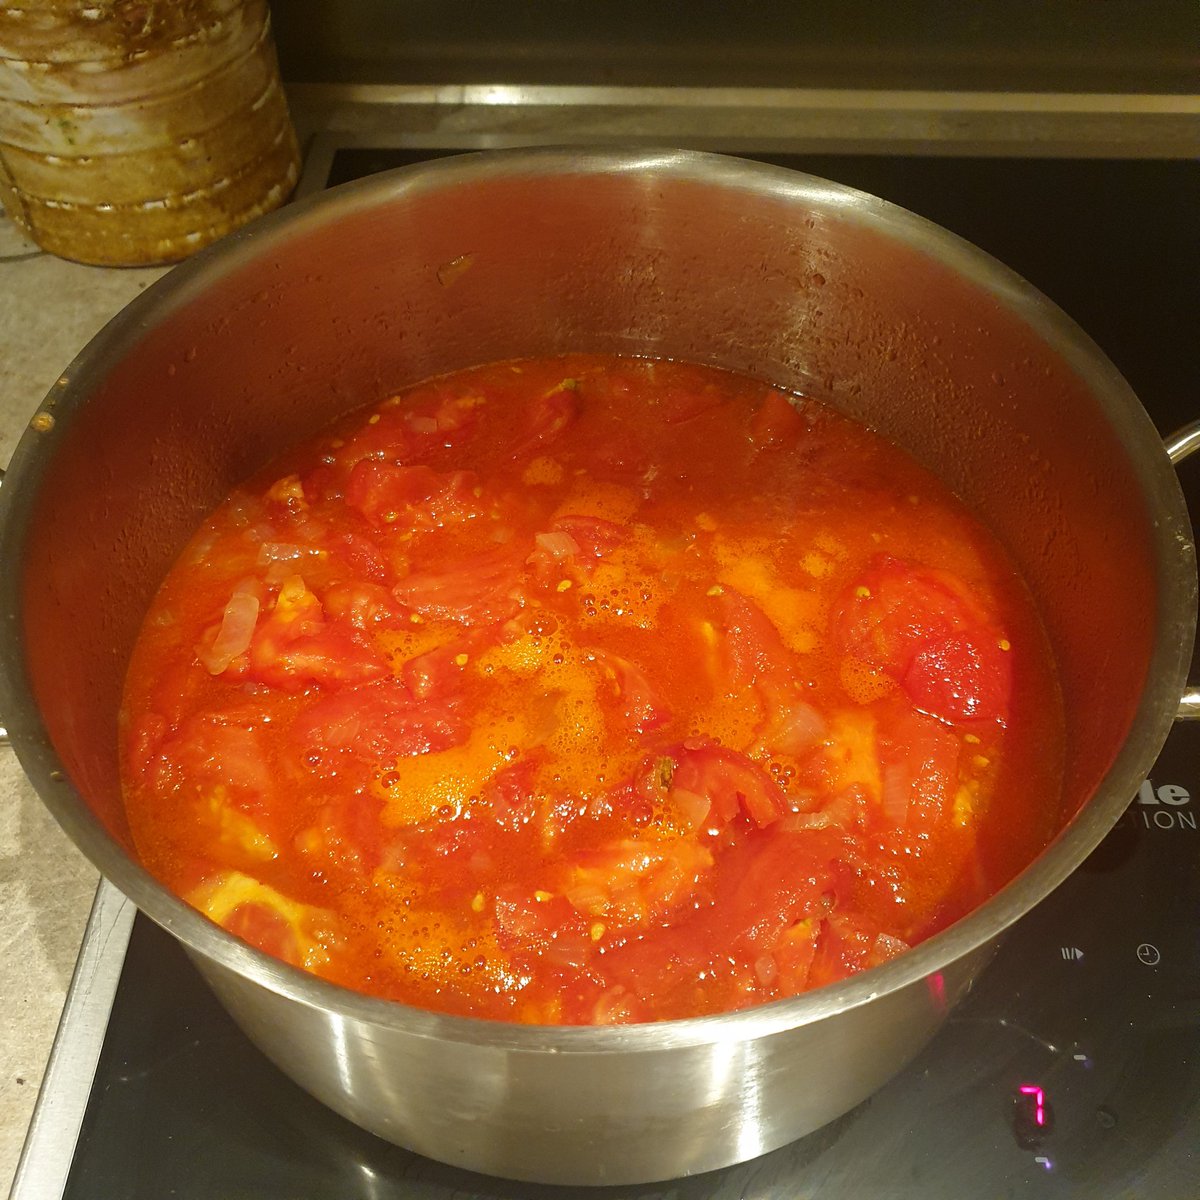 keep that heat low, and stir, stir stir. you see that bright orange foam? thats the tomato oil doing its work on the flesh. now we let the flavours develop. Slowly